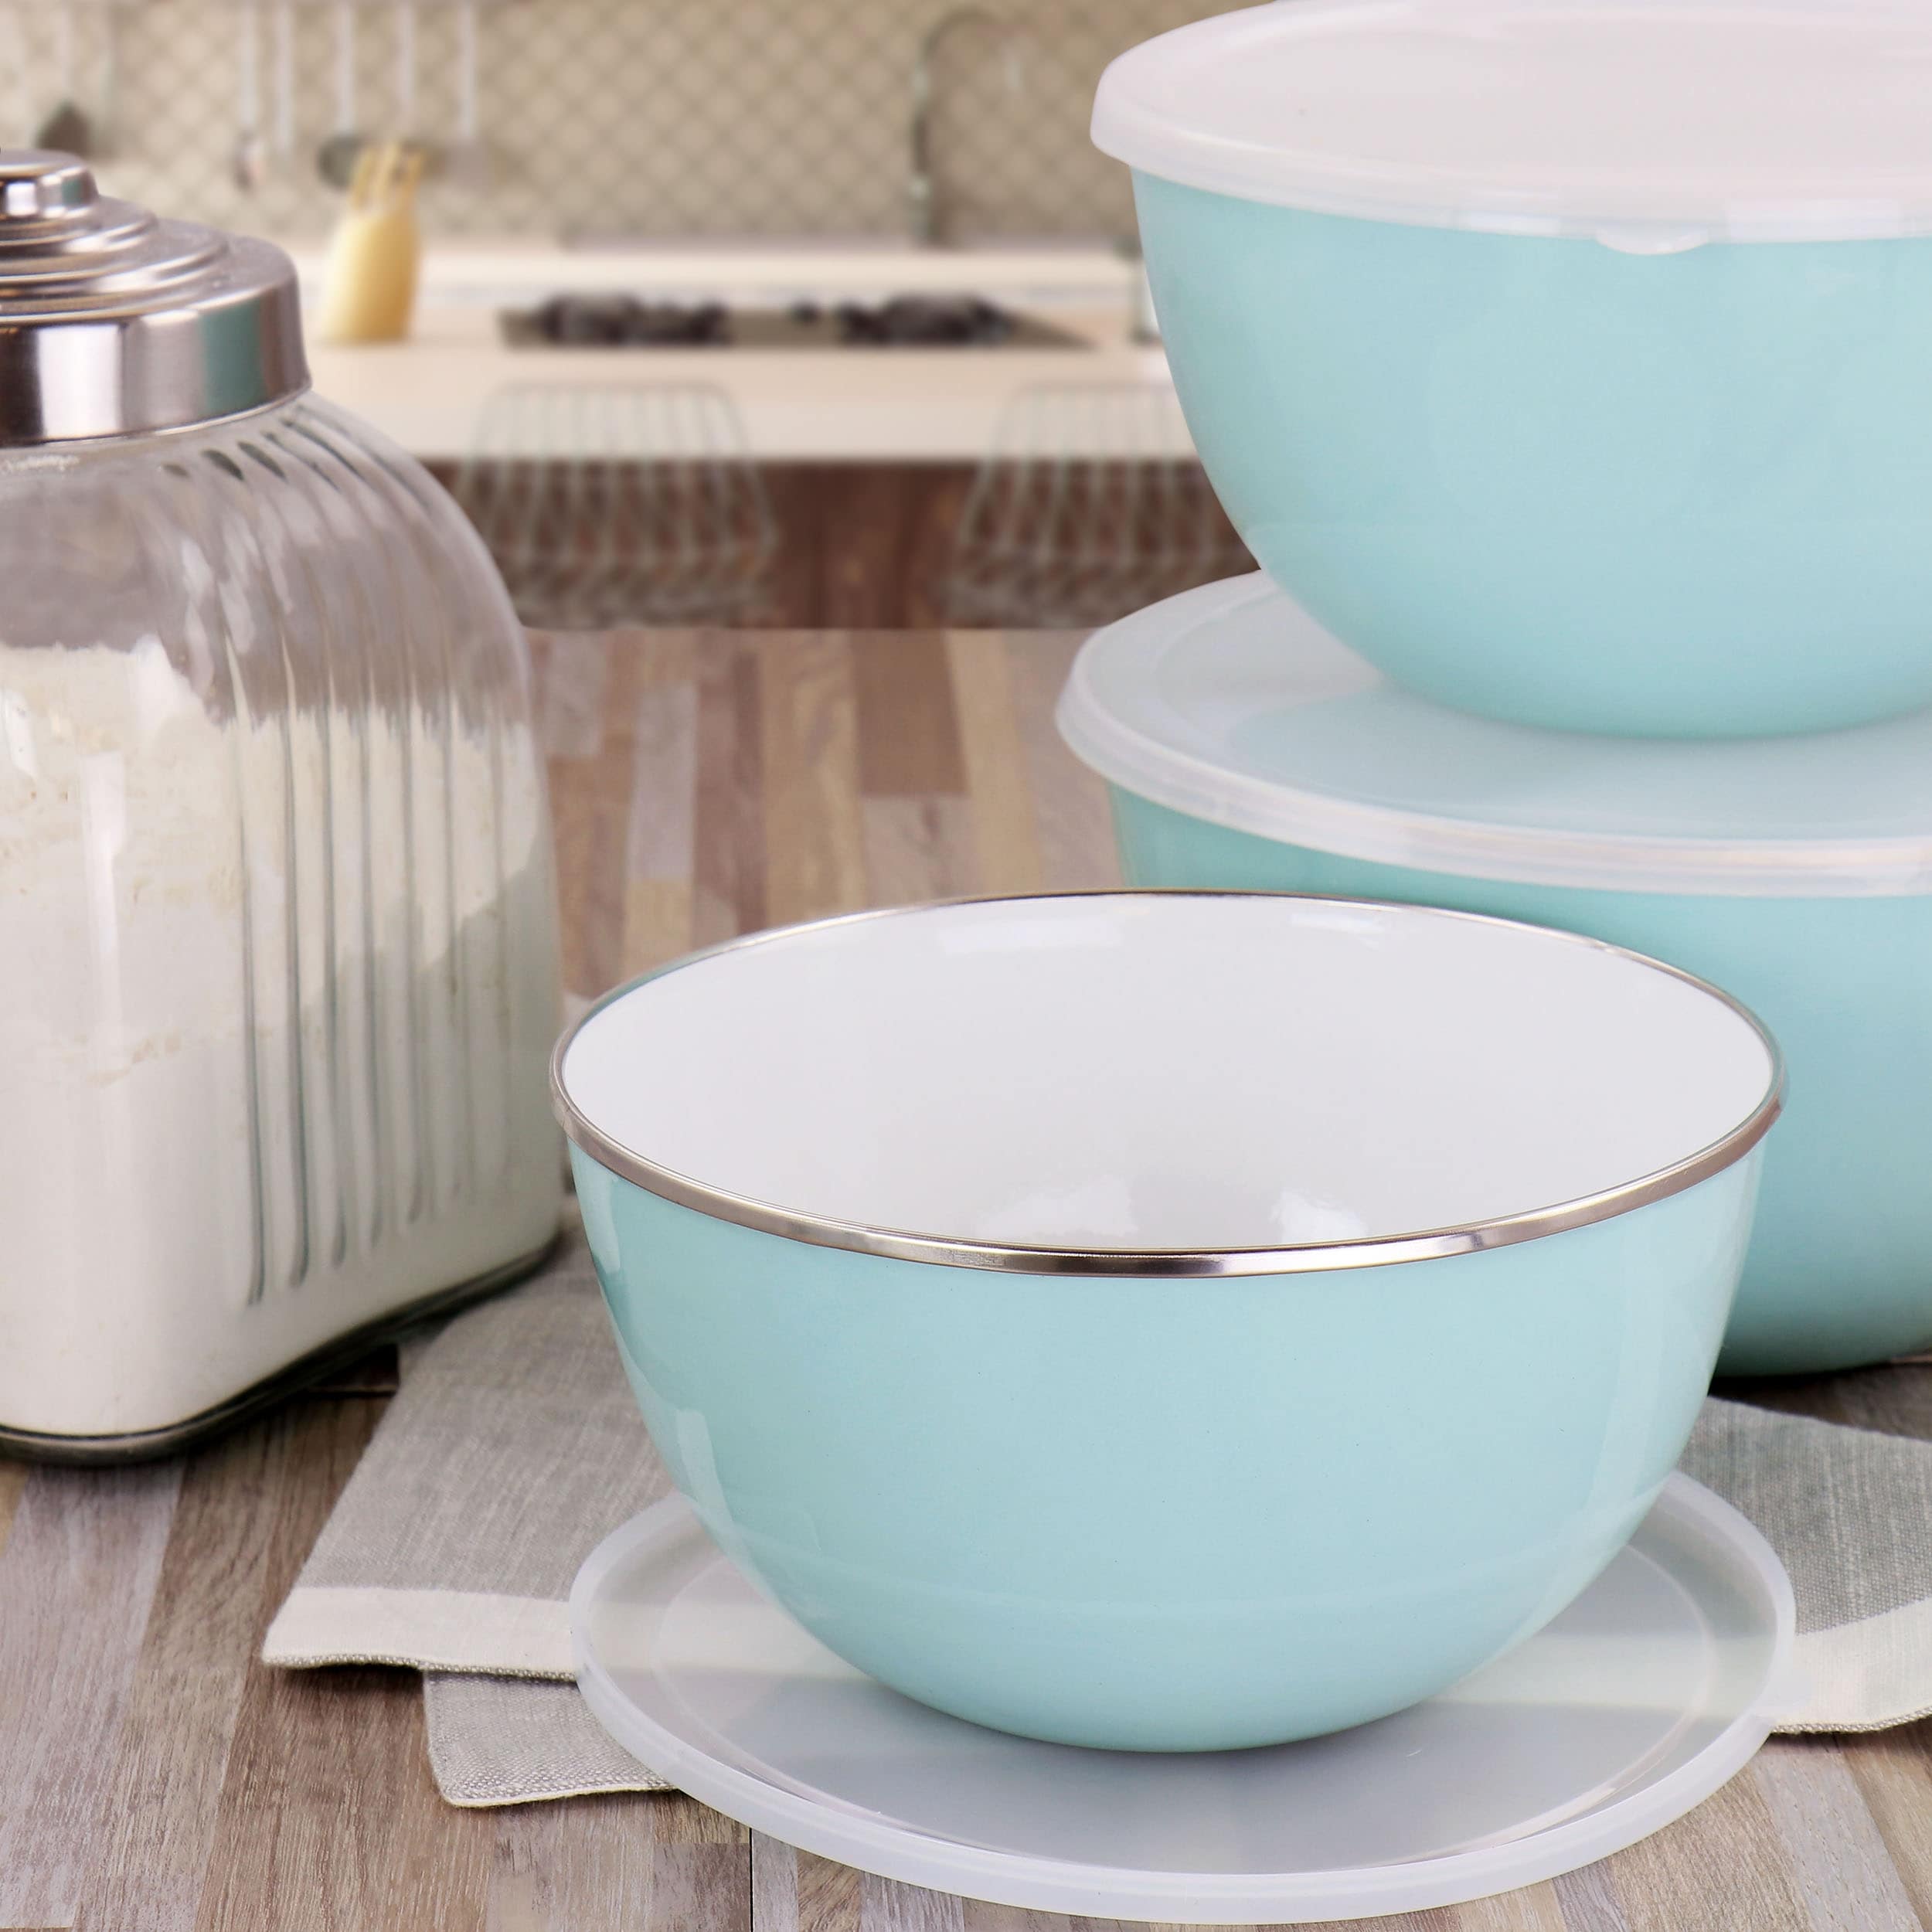 https://ak1.ostkcdn.com/images/products/is/images/direct/ef82426b600252993e87e989034a993fe80f4a43/Martha-Stewart-6-Piece-Enamel-Mixing-Bowl-and-Lid-Set.jpg